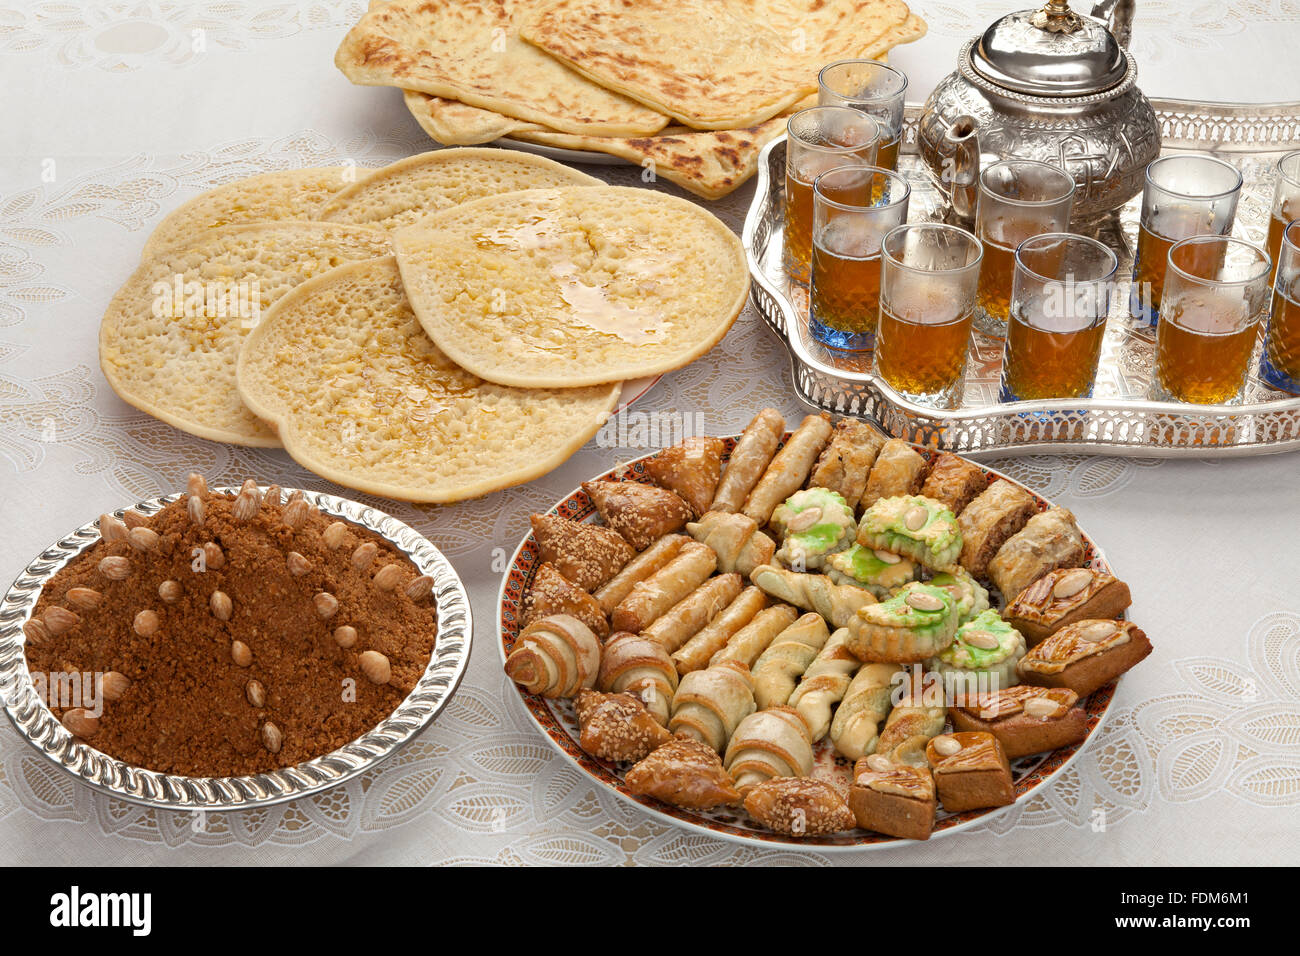 Traditional Moroccan tea,cookies, almond sellou and pancakes at id-al-fitr the end of Ramadan Stock Photo